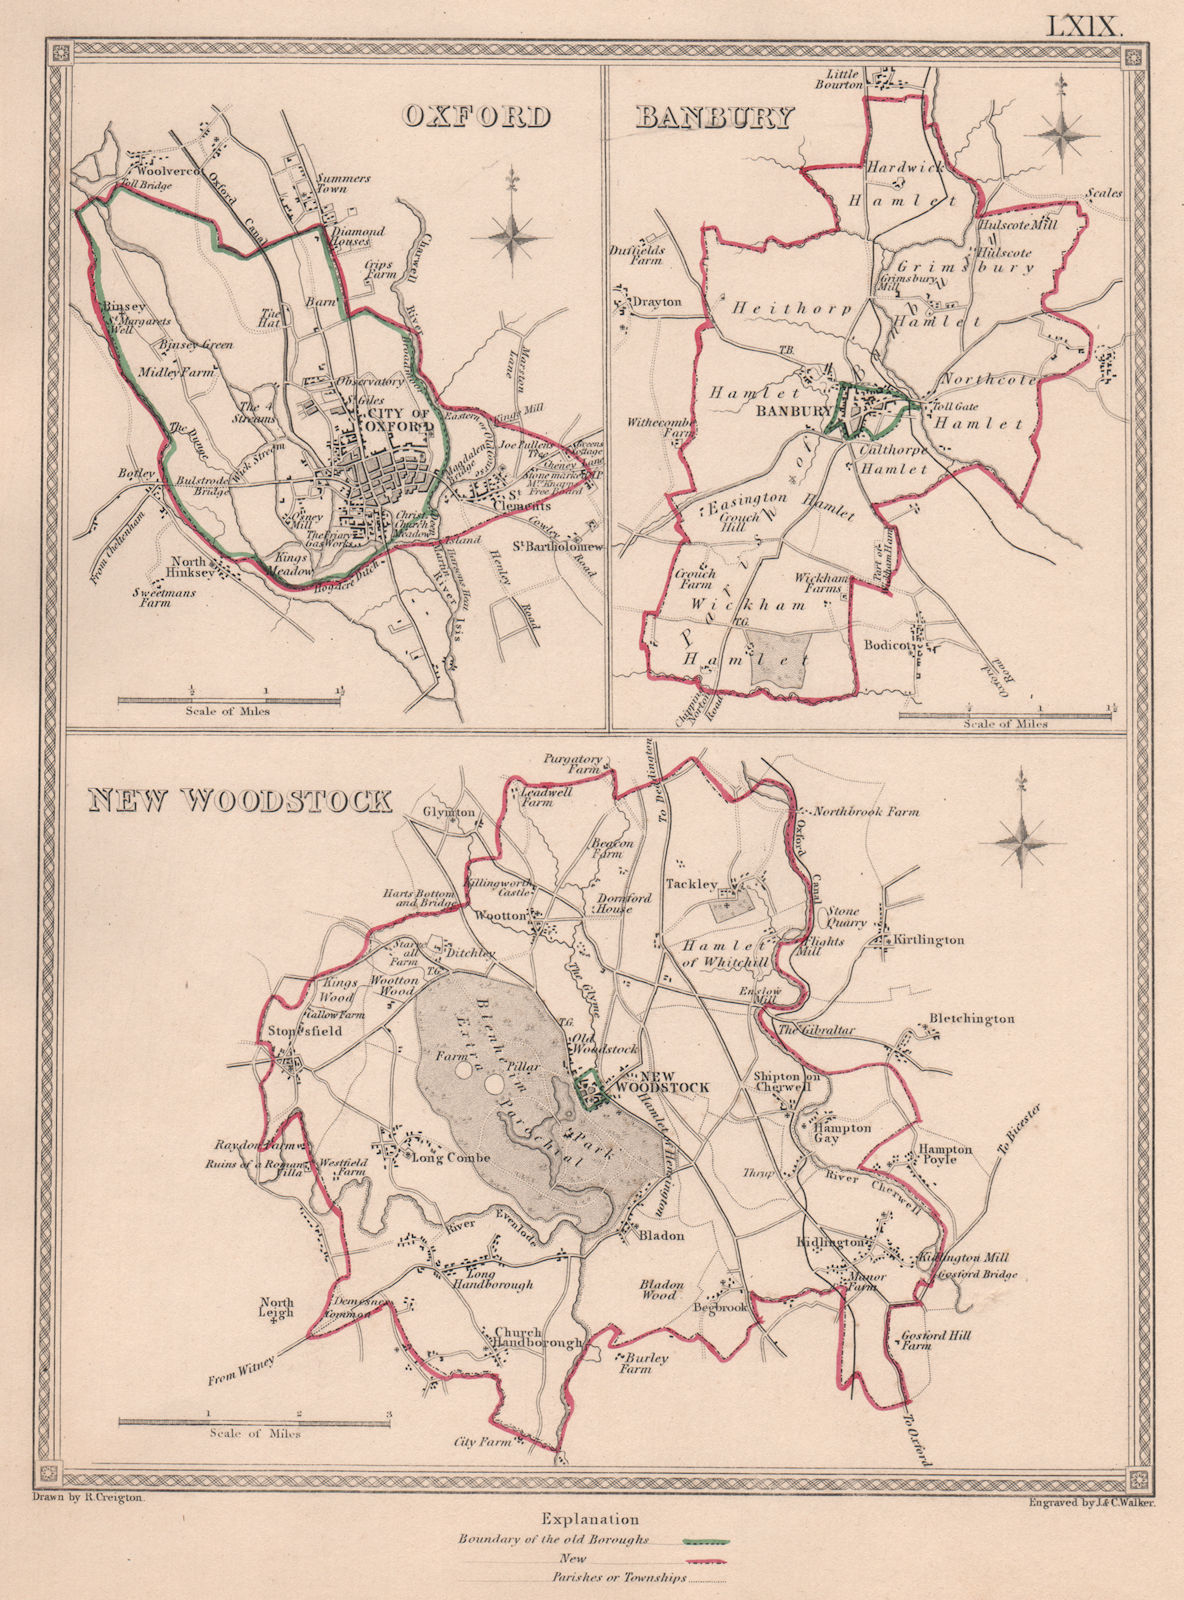 OXFORDSHIRE TOWNS. Oxford Banbury New Woodstock plans.CREIGHTON/WALKER 1835 map